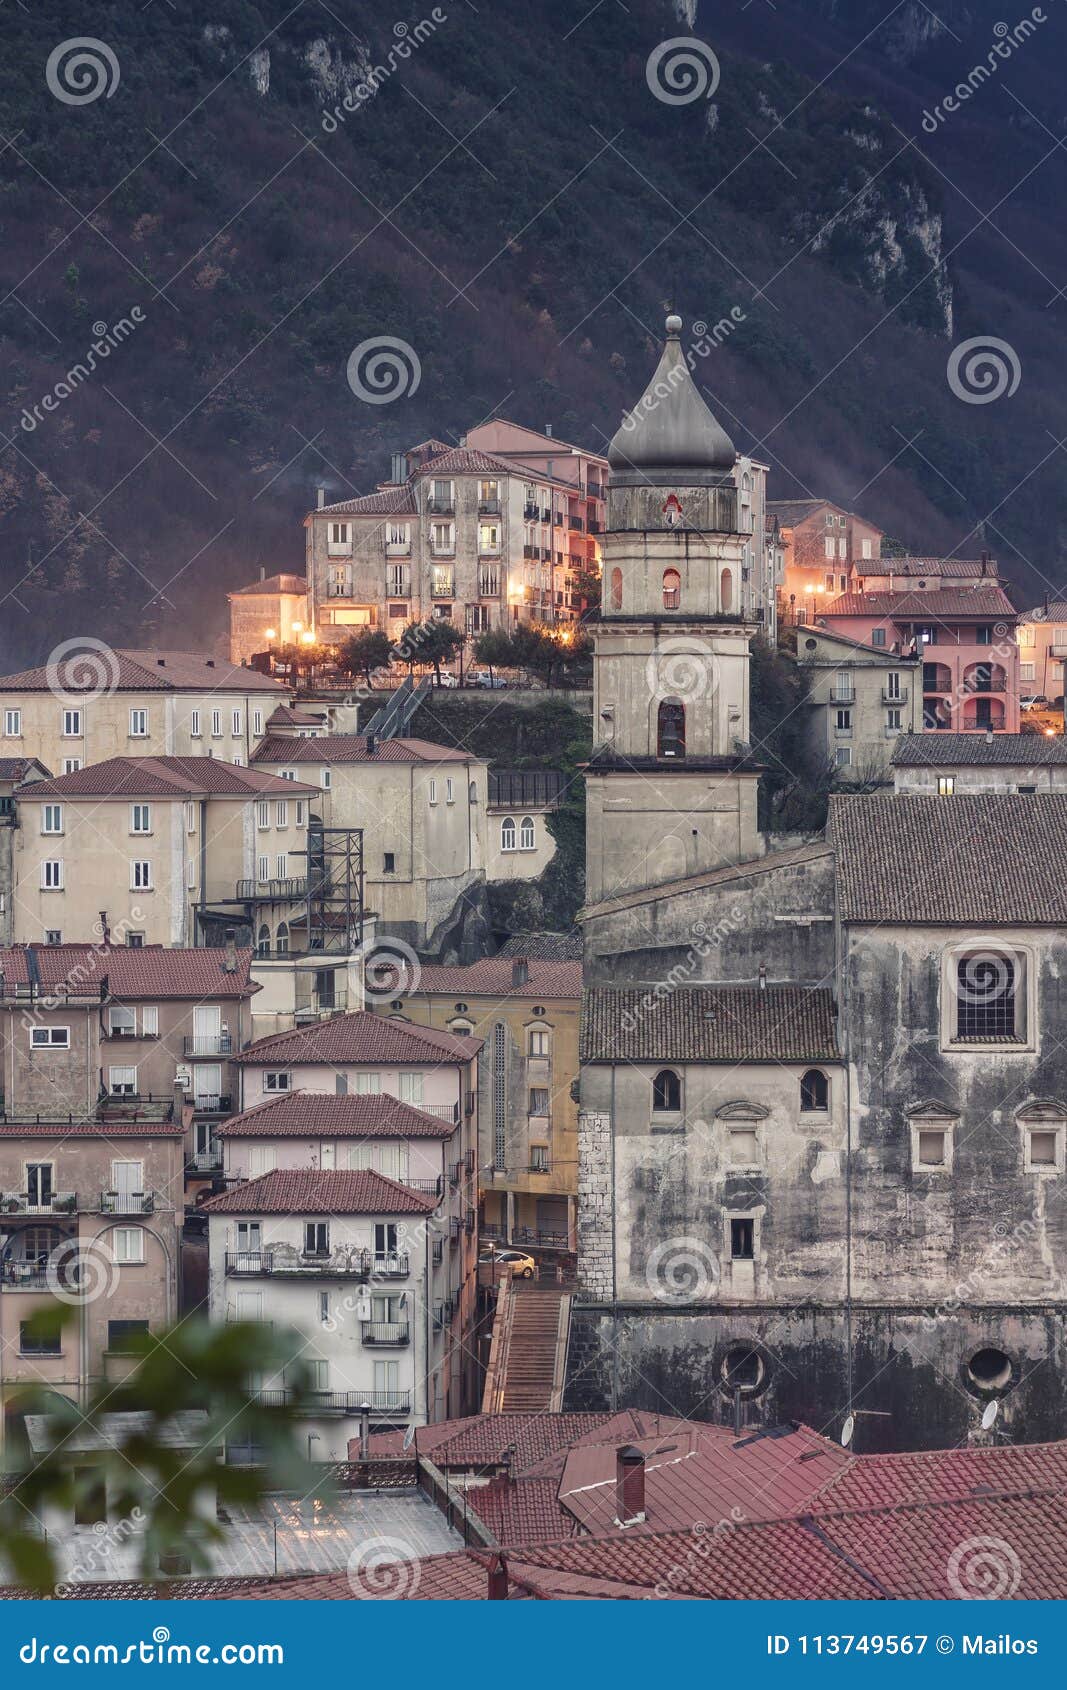 glimpse of the city of campagna in the province of salerno